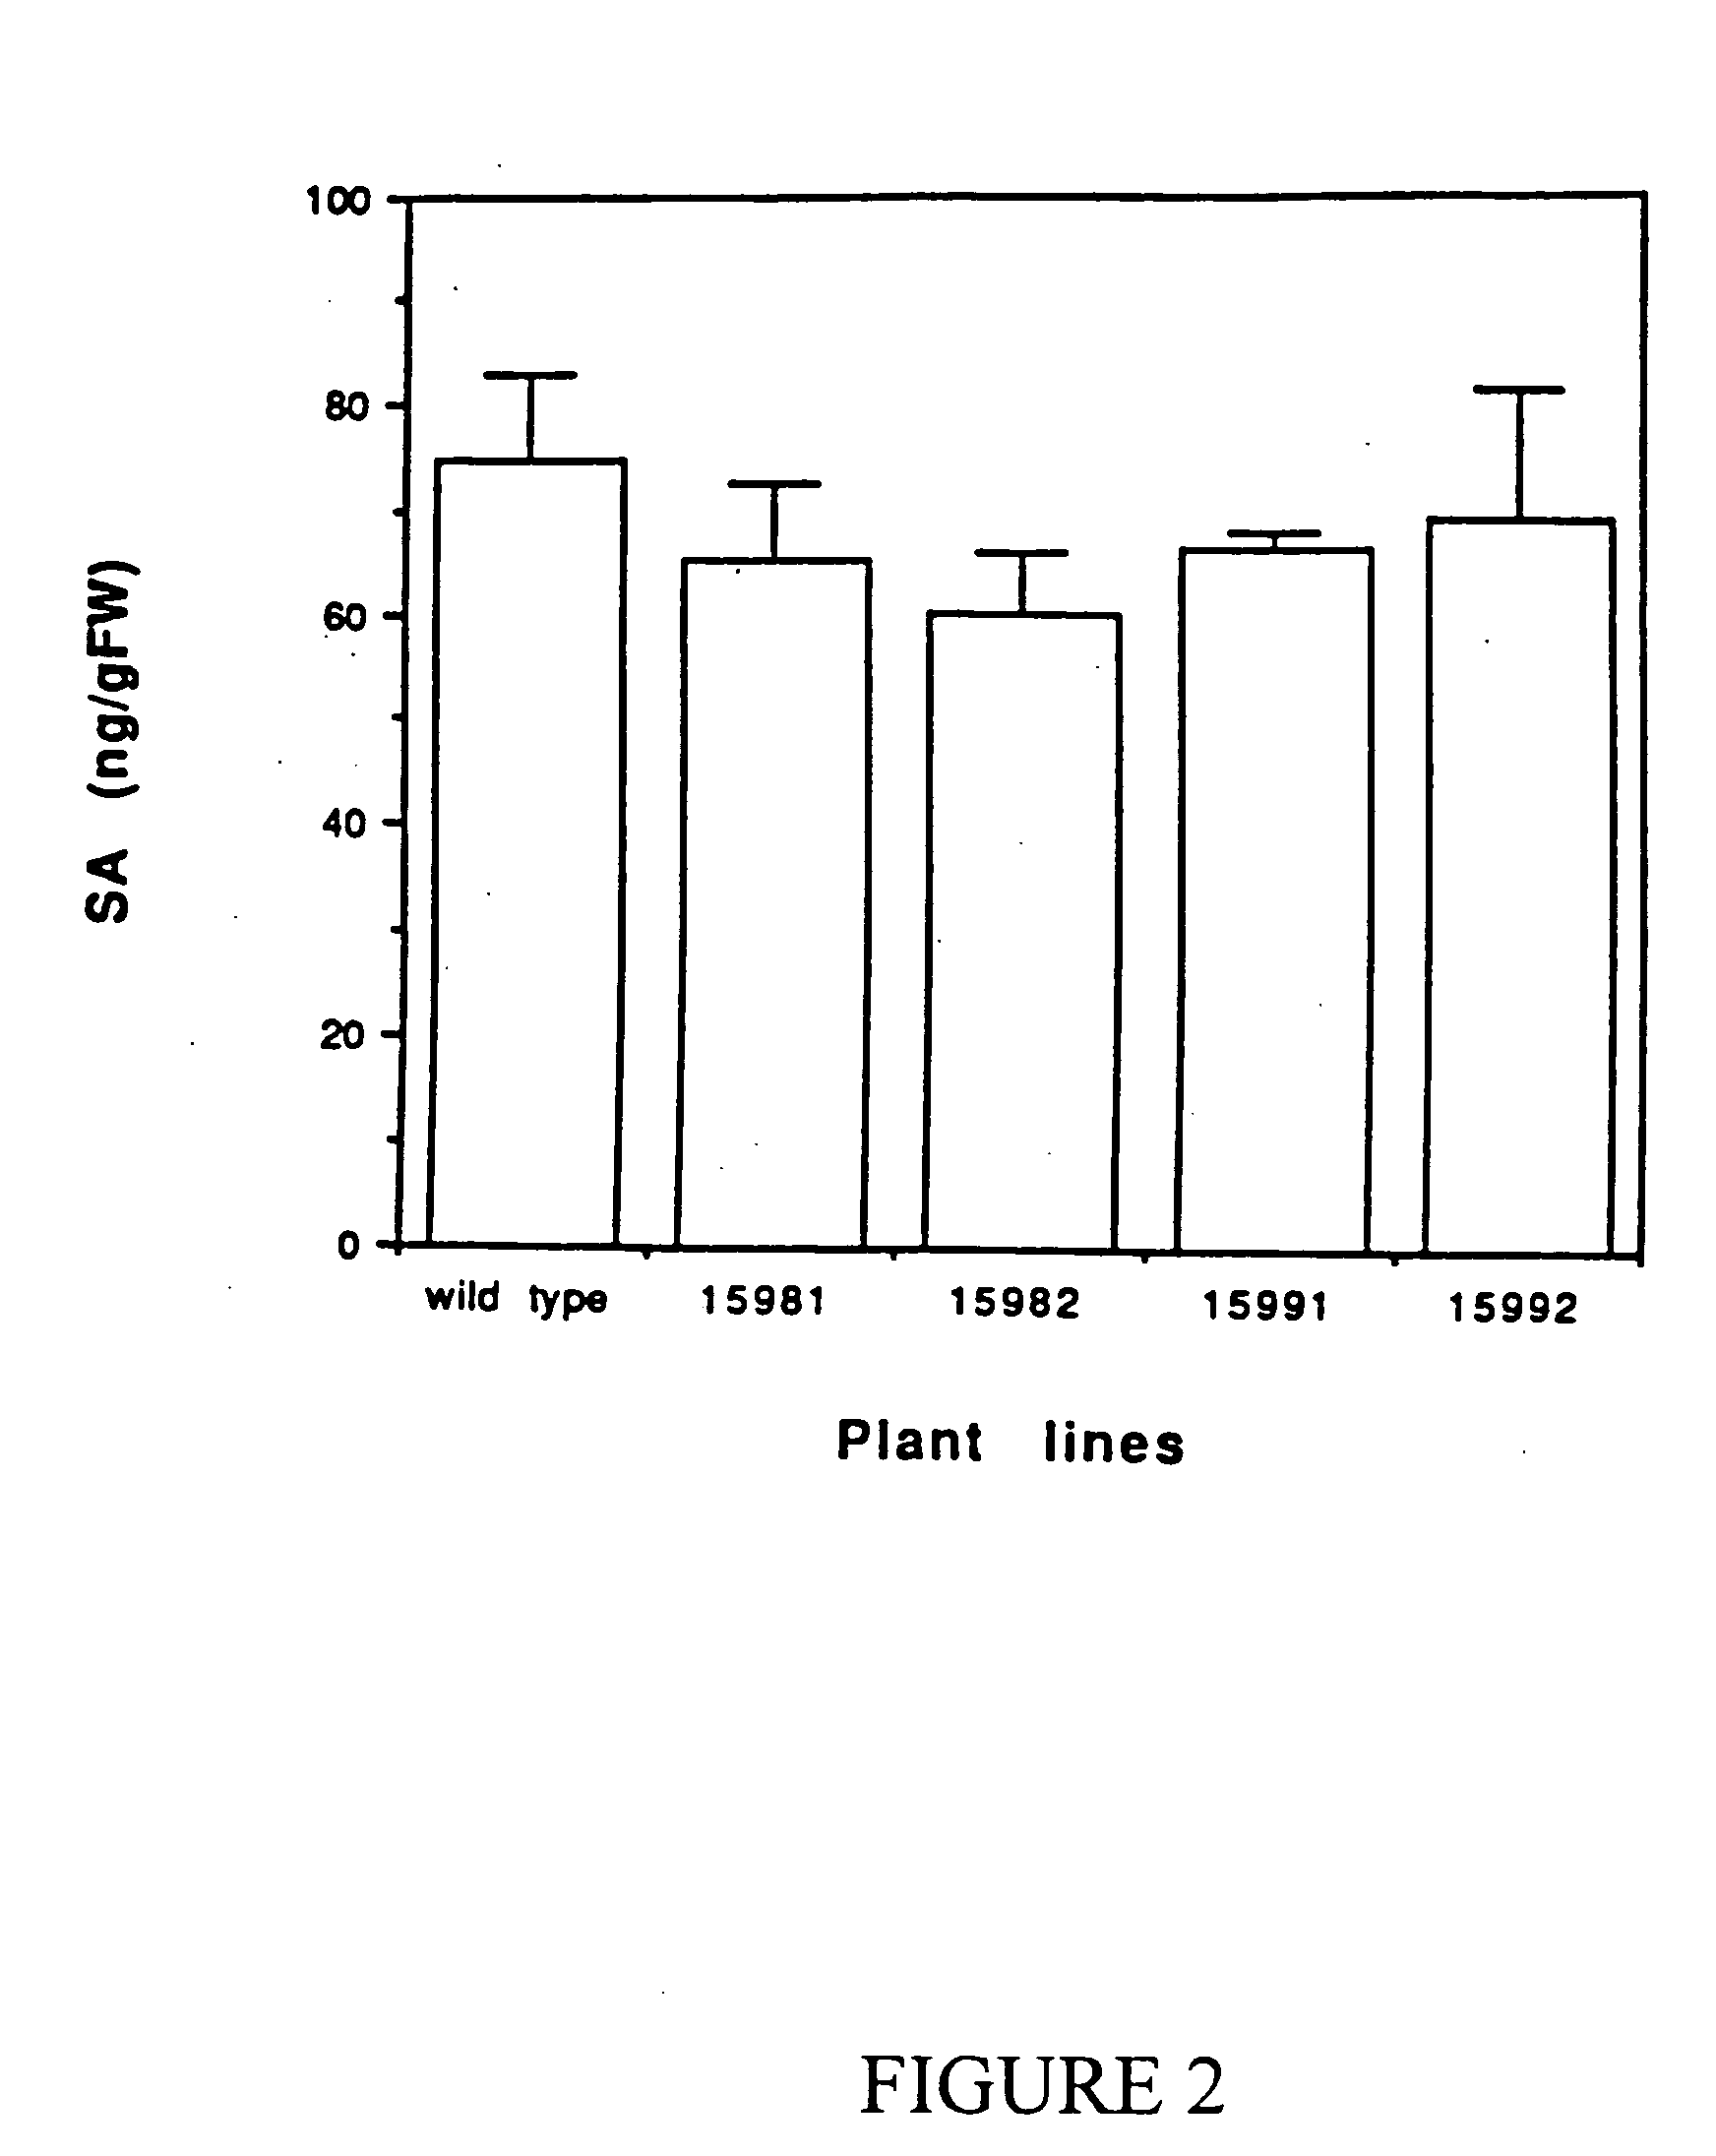 Transgenic plants producing a pap II protein